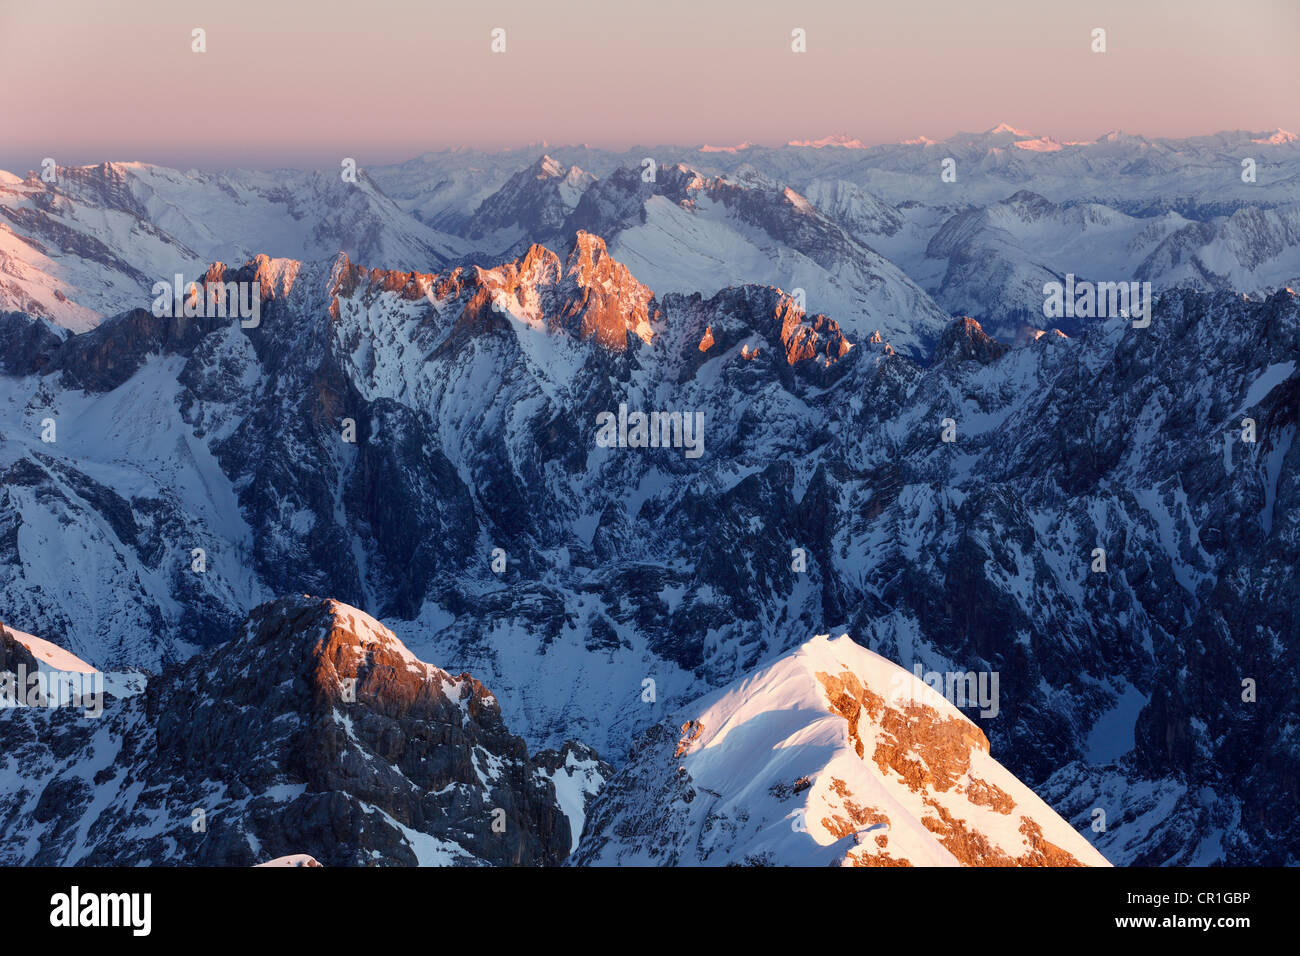 View from Zugspitze Mountain over the Hoellentalspitzen Mountains and Dreitorspitze Mountain in the evening light Stock Photo